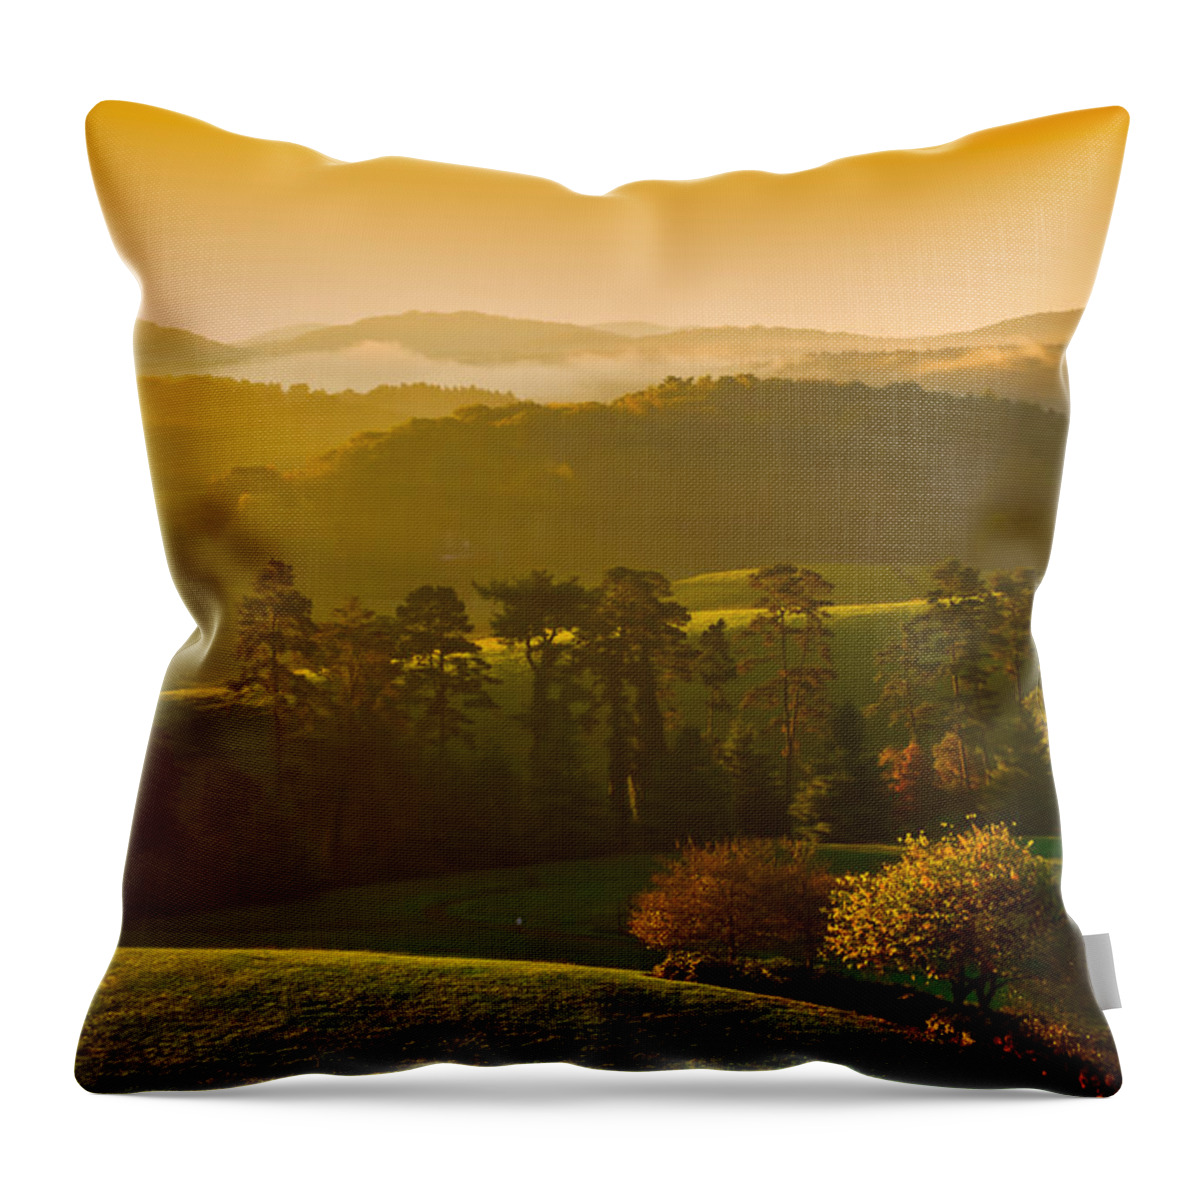 Dawn's Gentle Rays Lightly Brush The Rolling Hills Of The Asmokey Mountains Throw Pillow featuring the photograph Smokey Mountain Sunrise by Tom Gresham